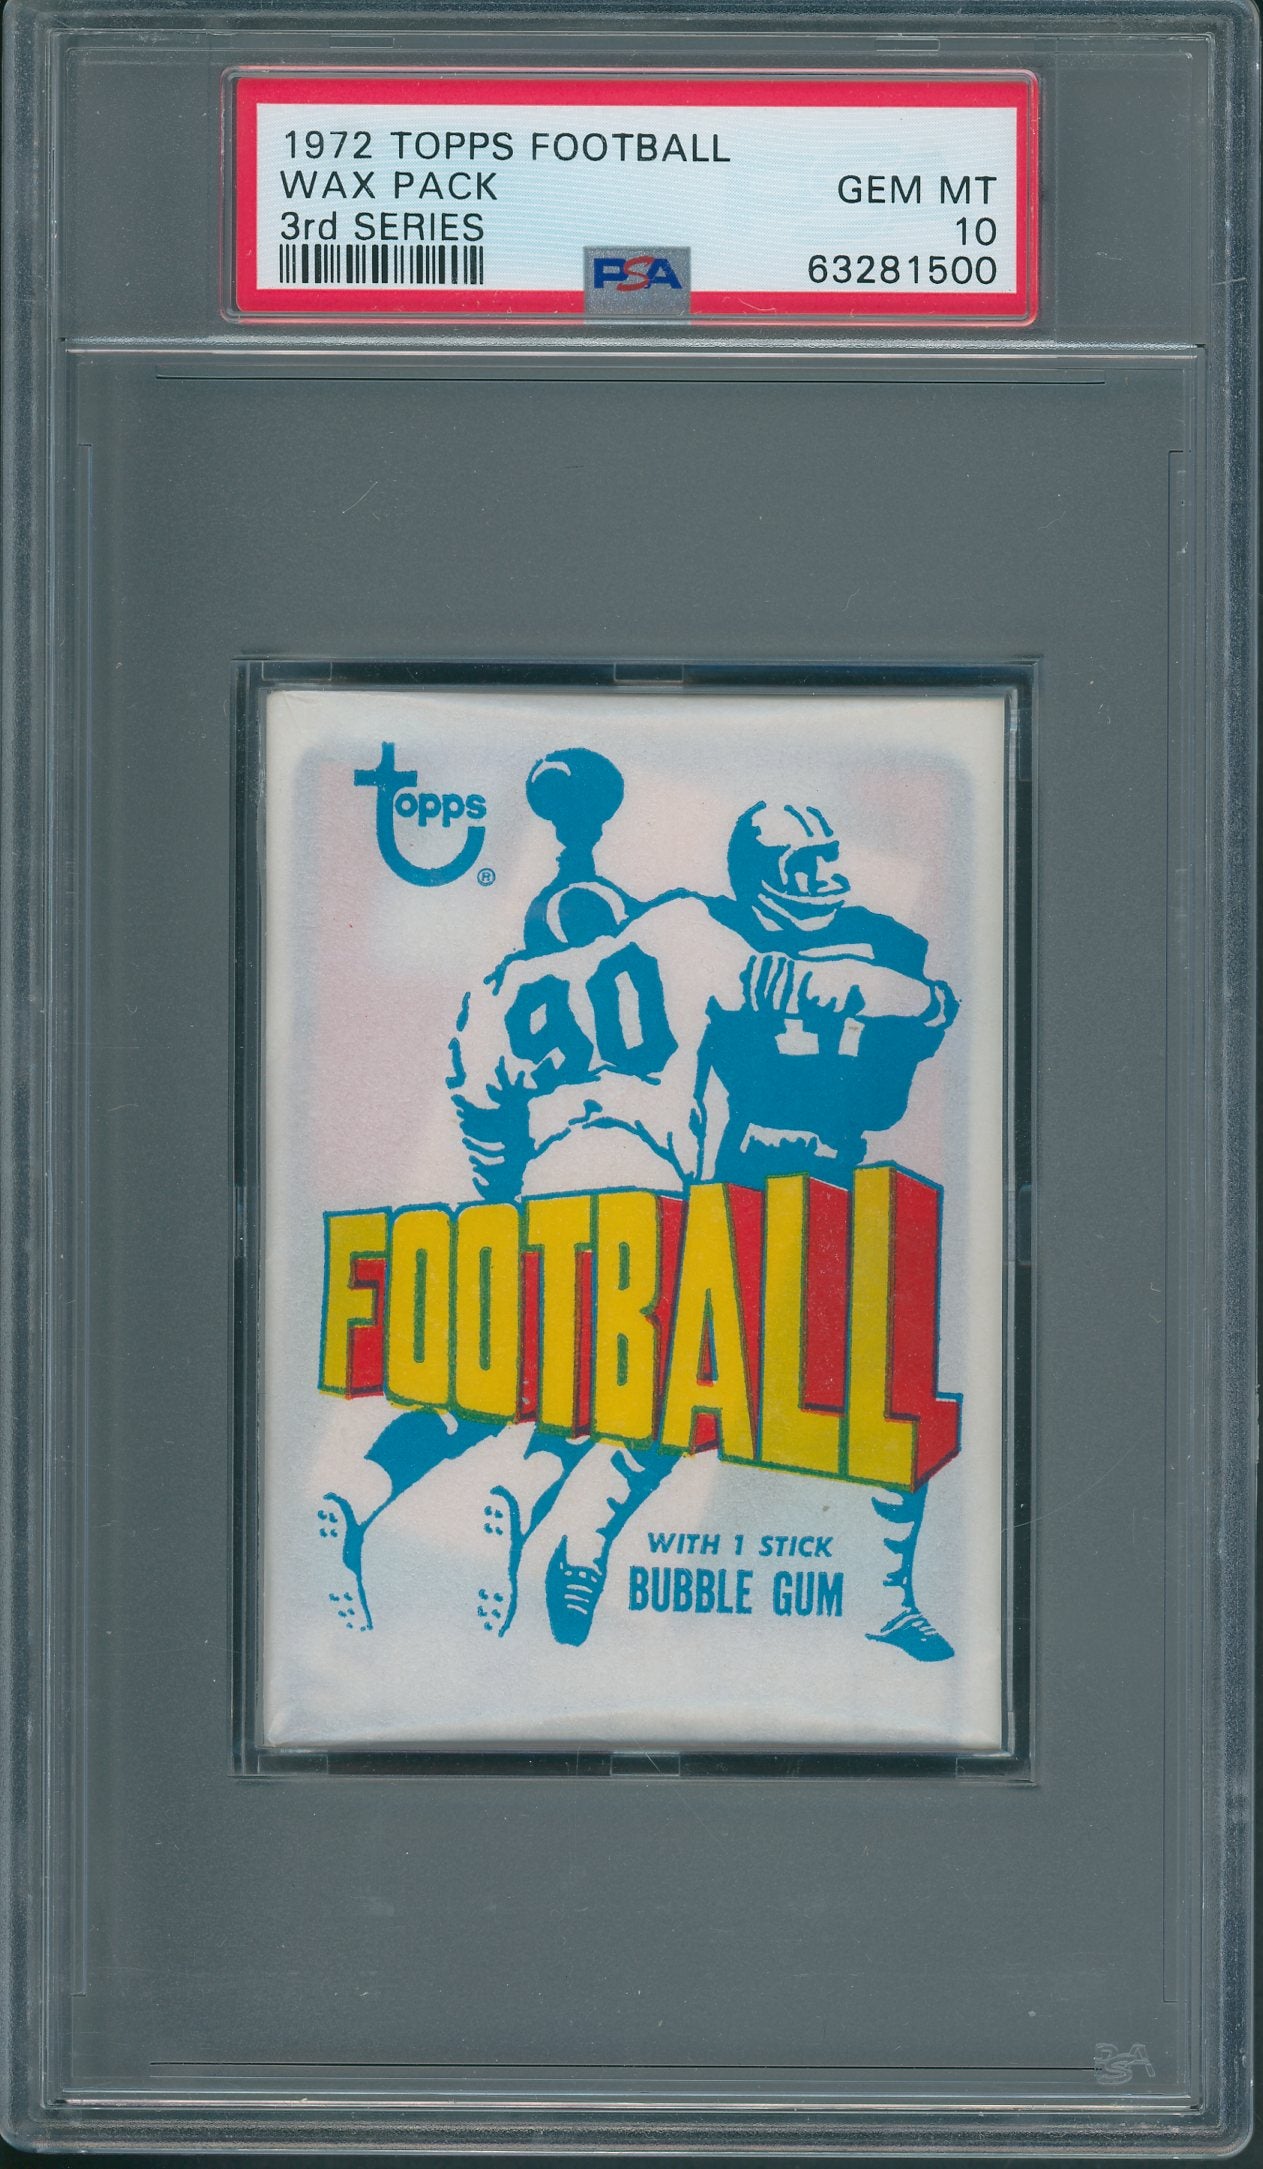 1972 Topps Football Unopened 3rd Series Wax Pack PSA 10 *1500